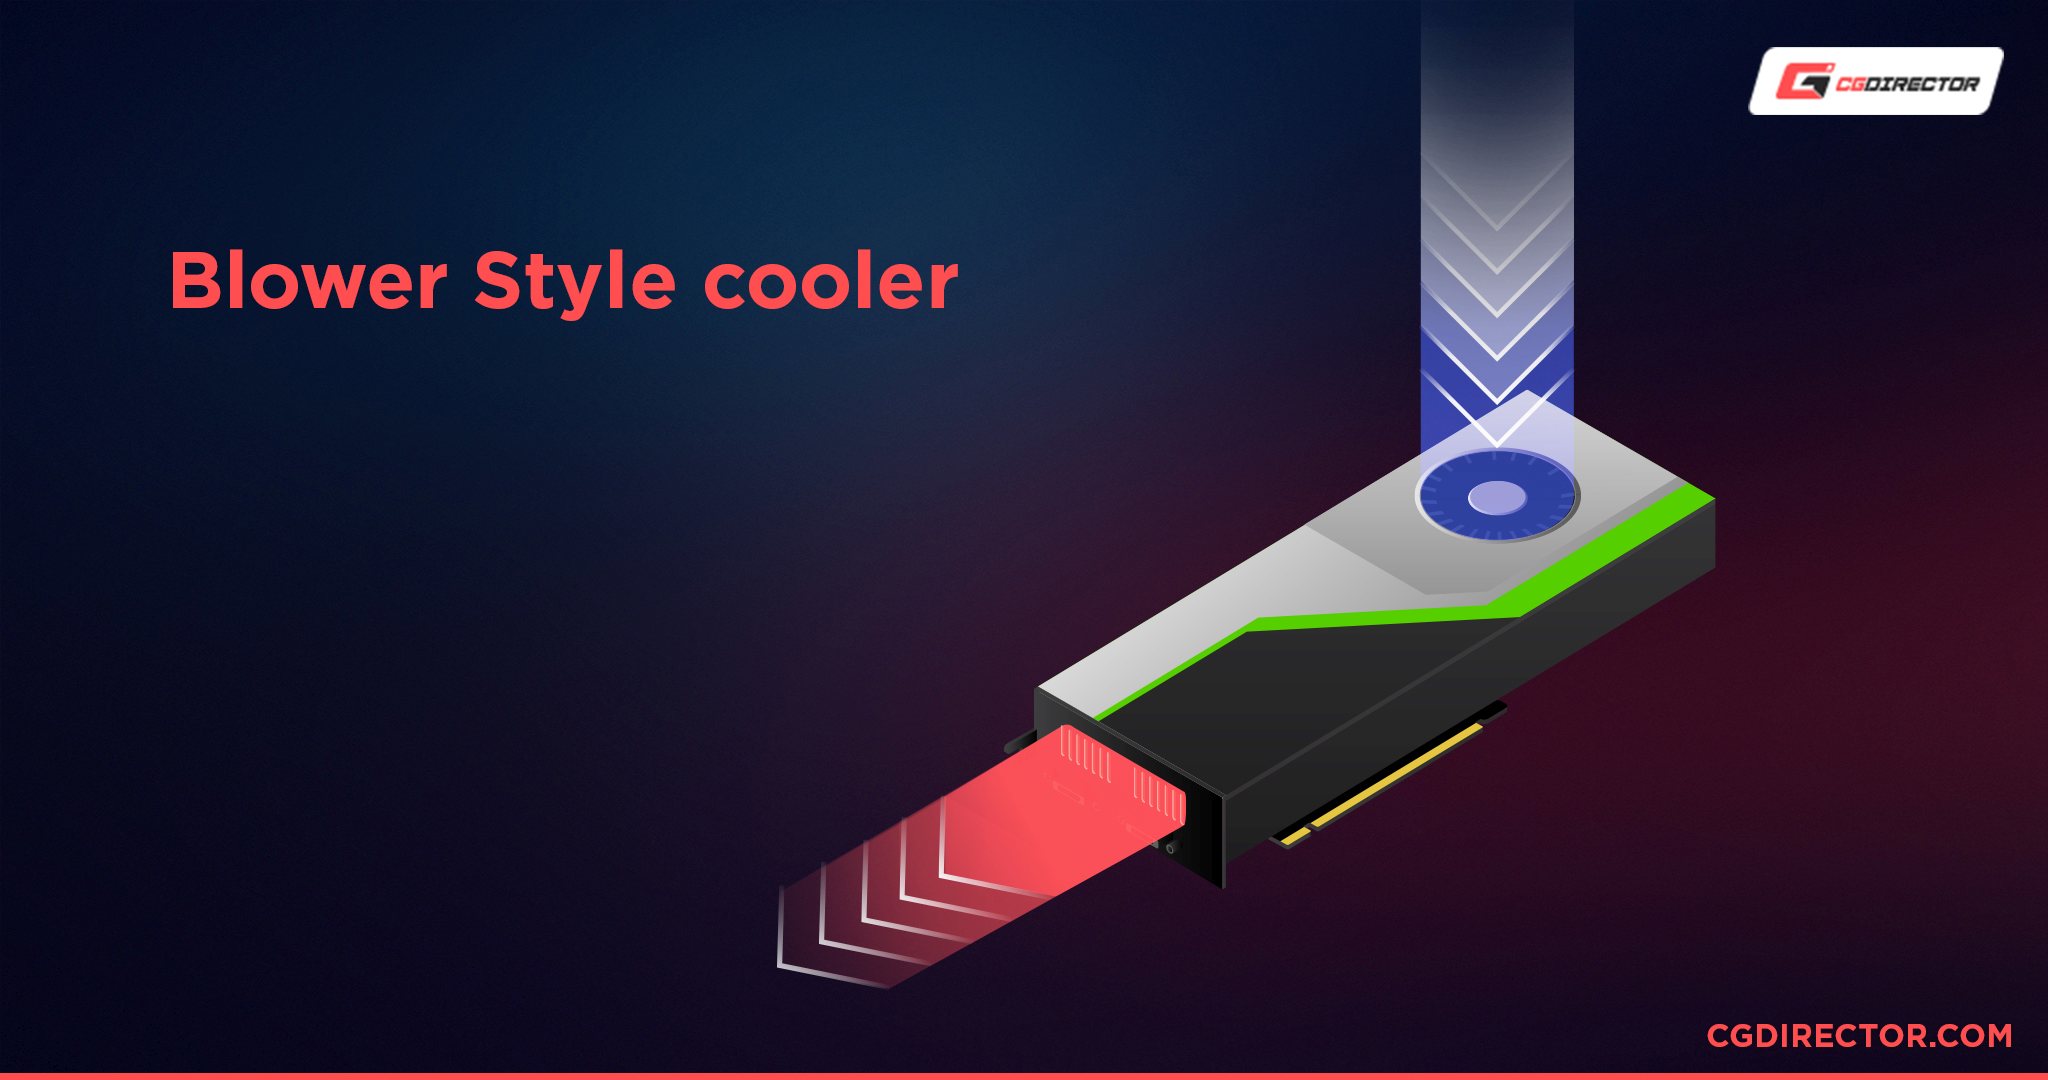 Blower style cooler Airflow